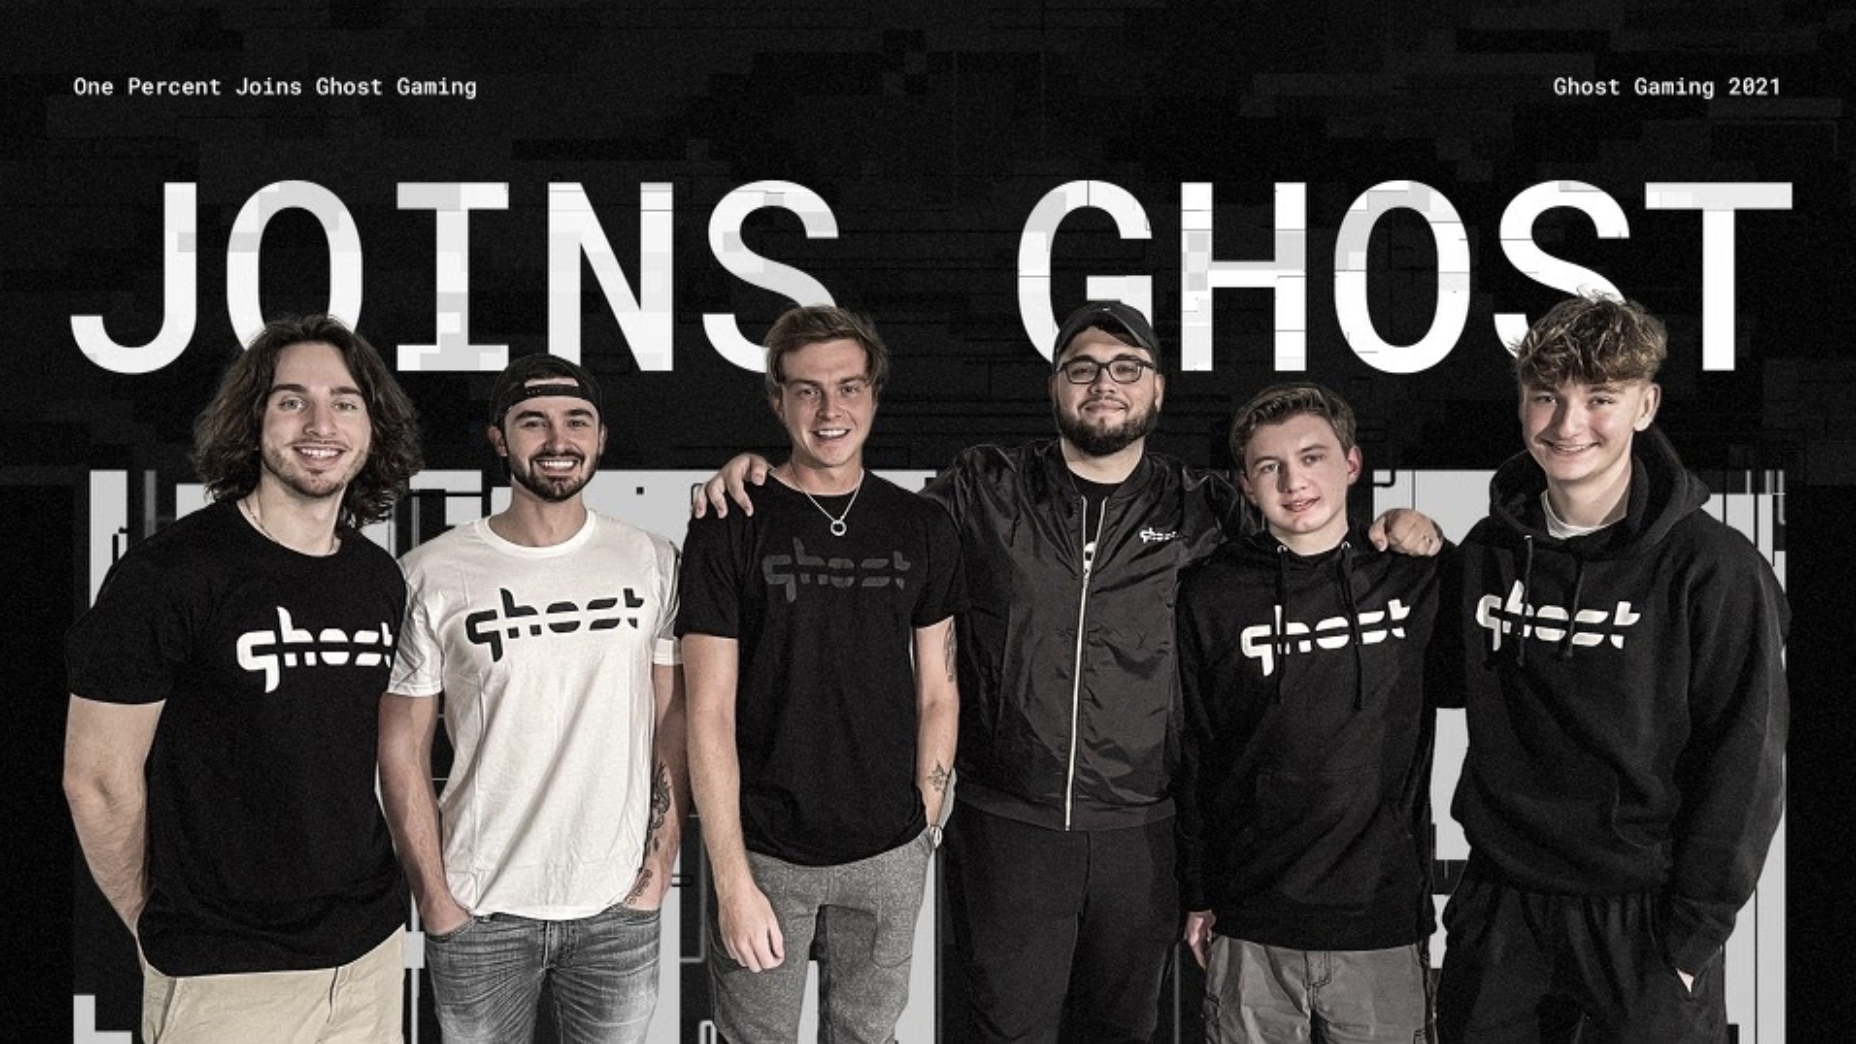 of ghost gaming